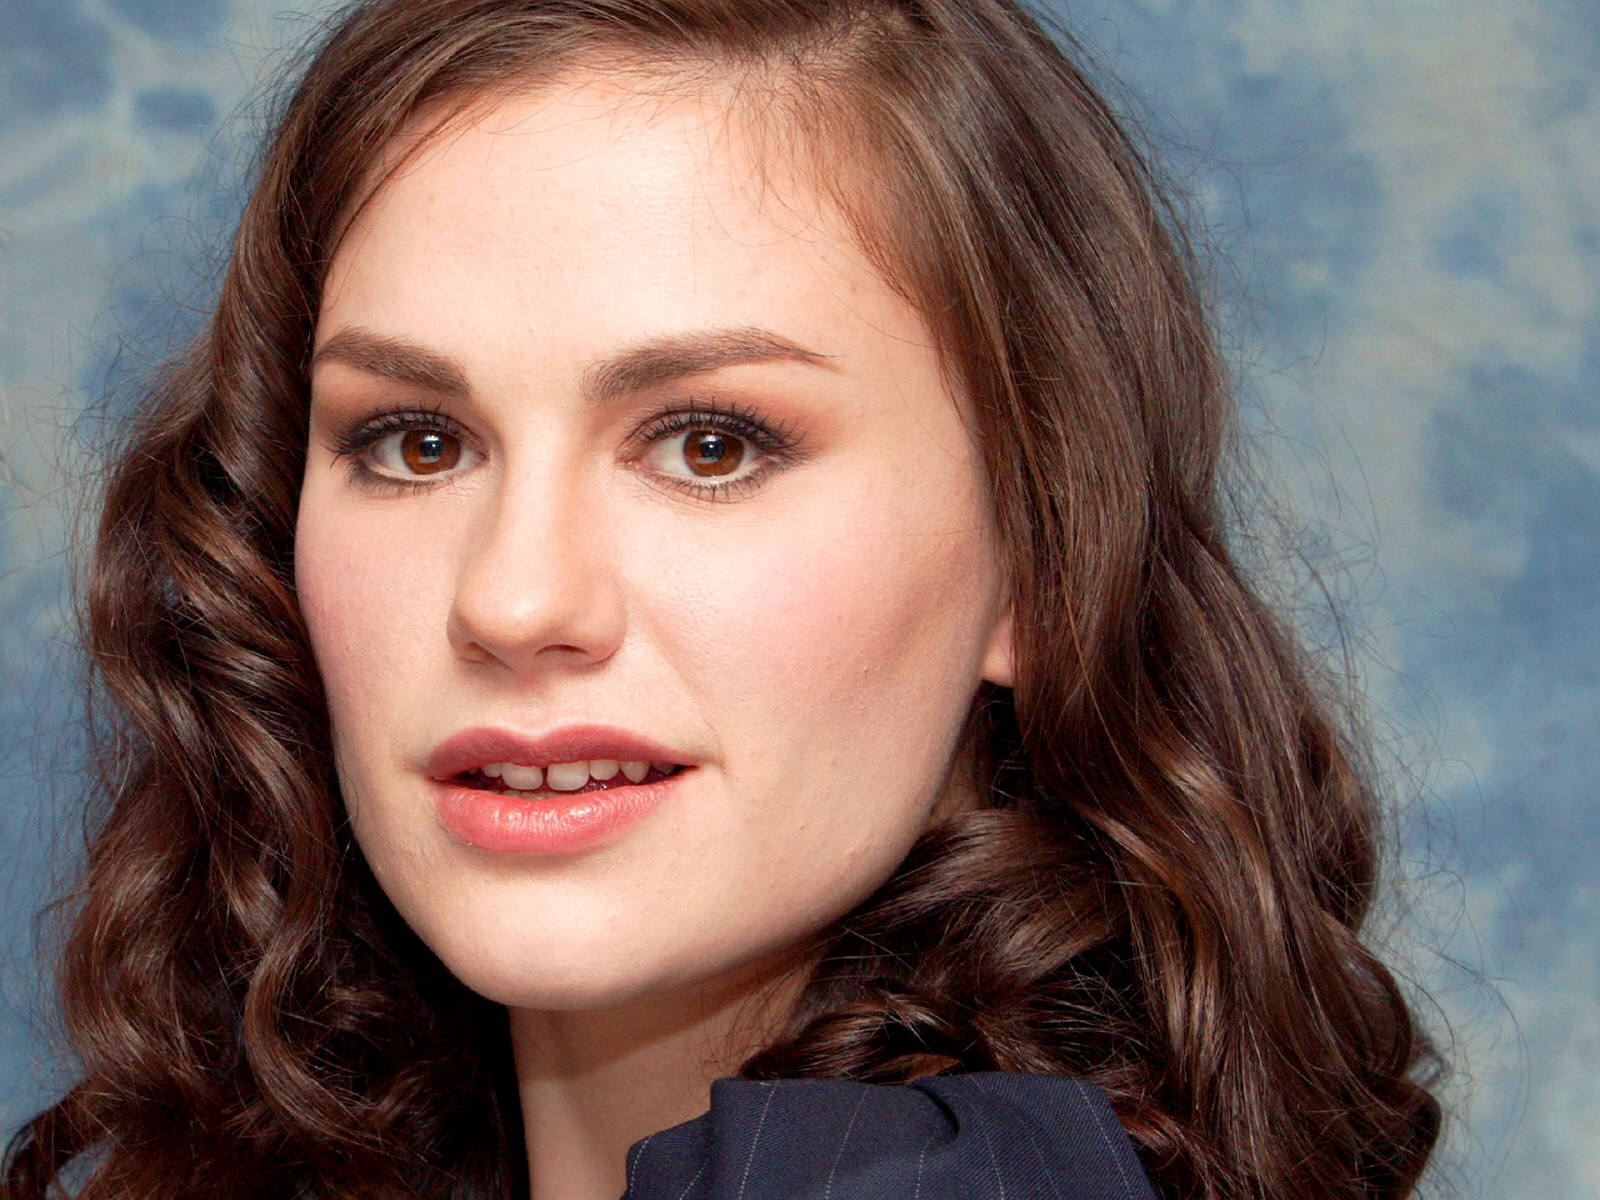 Download full size Anna Paquin wallpaper / Celebrities Female / 1600x1200